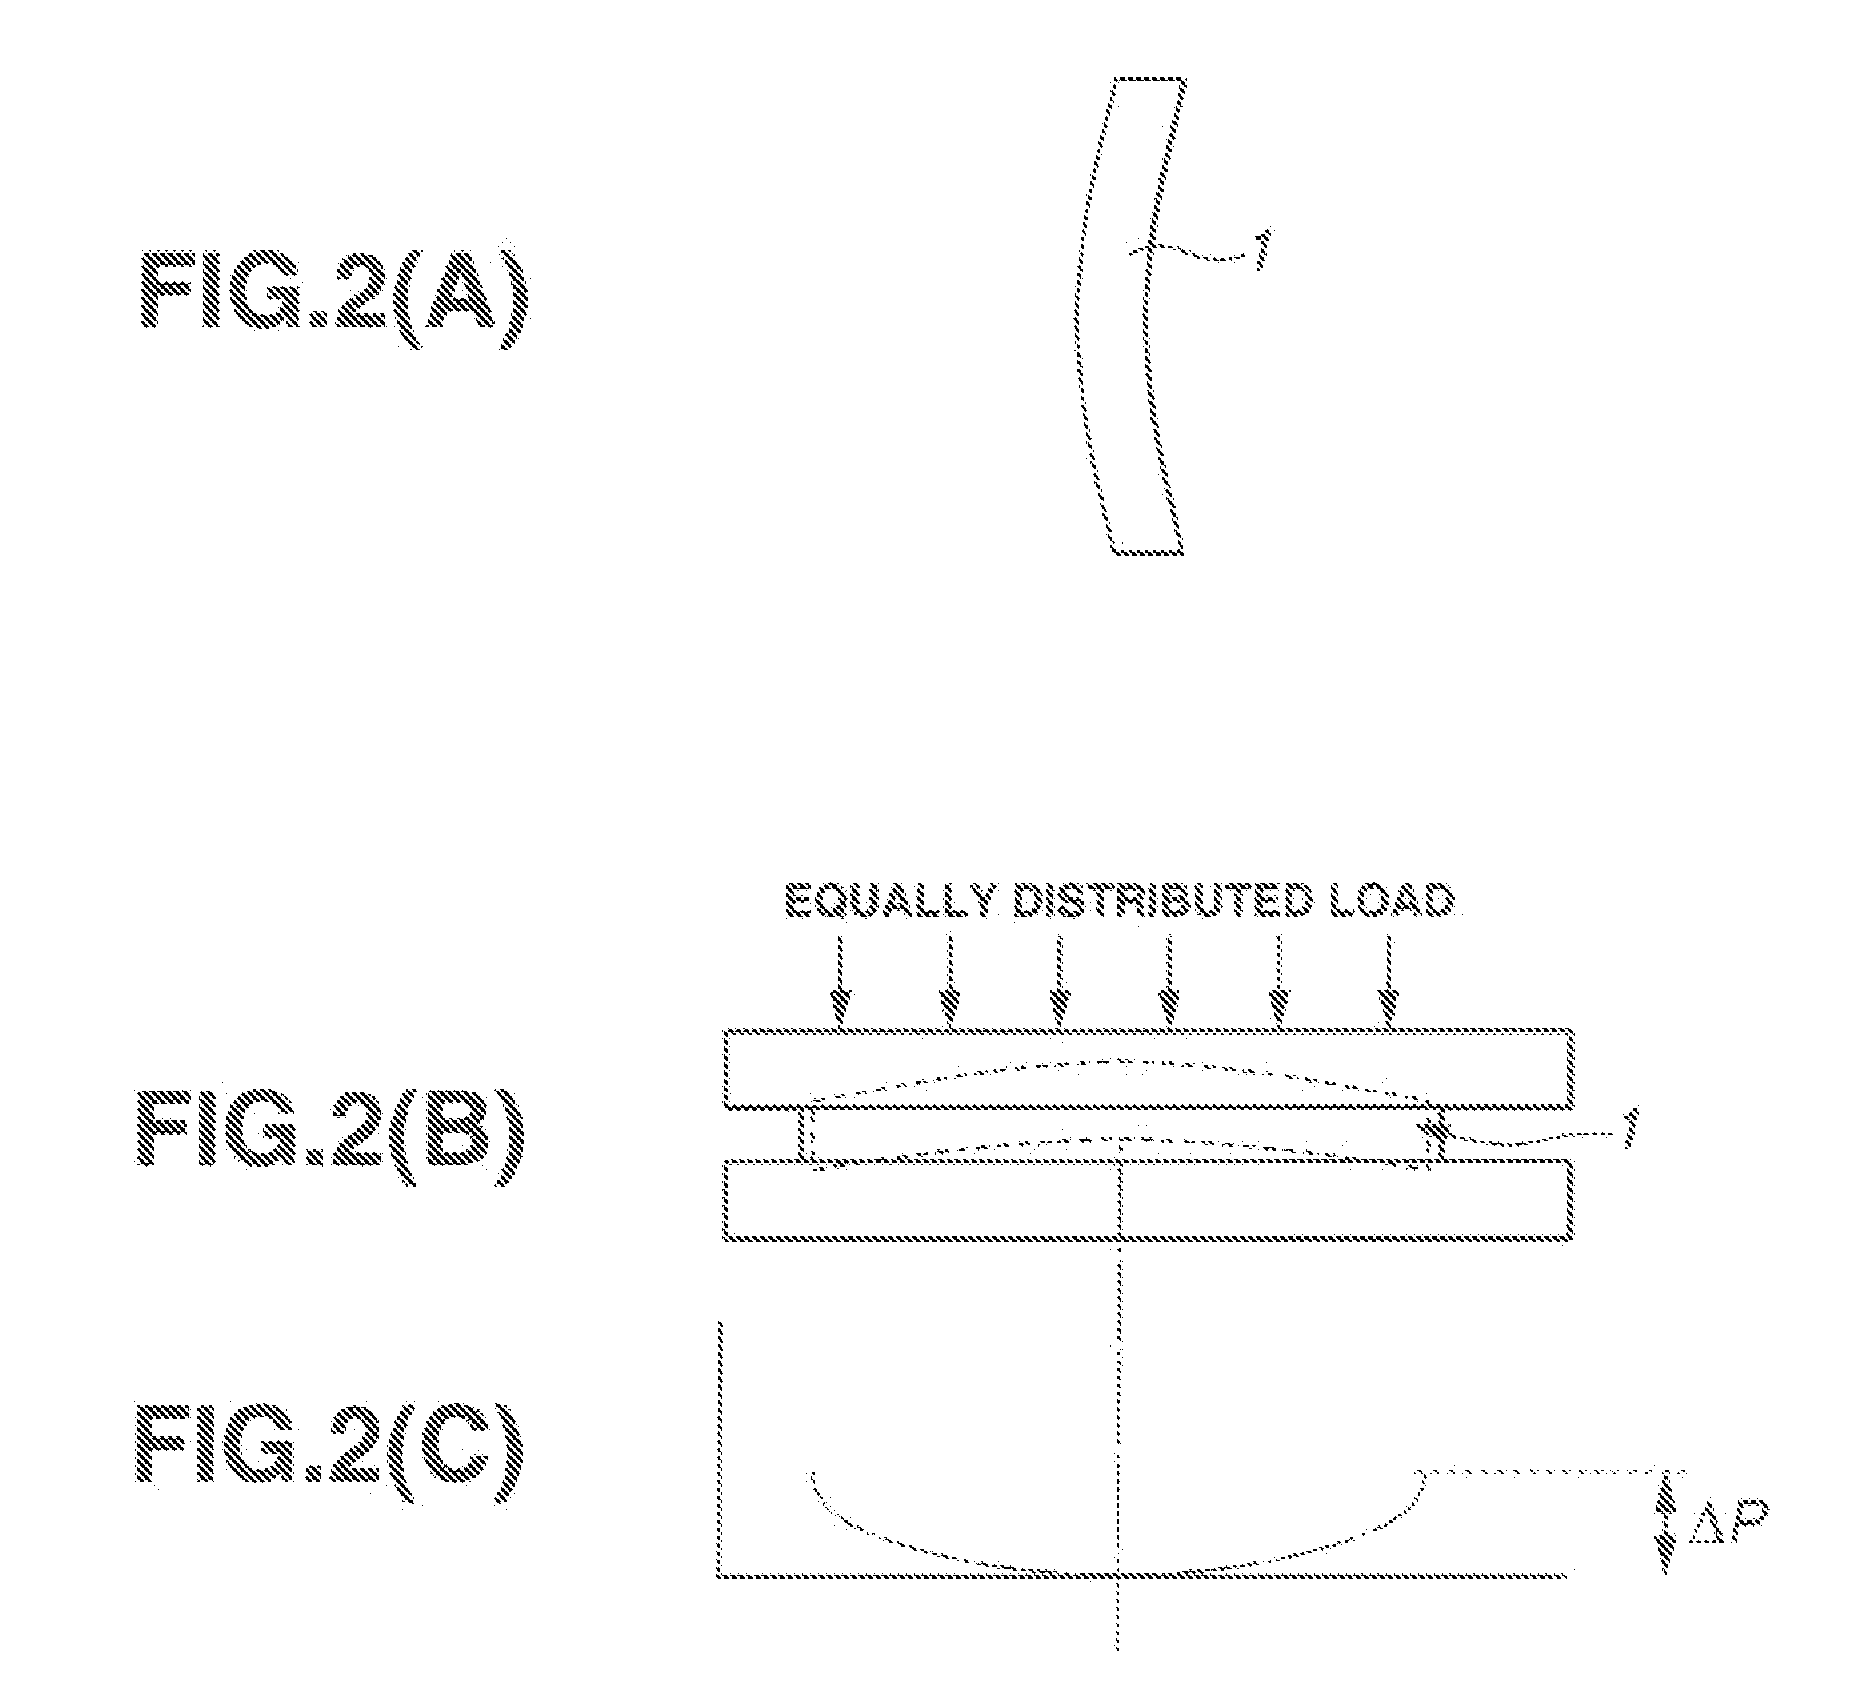 Large-sized substrate and method of producing the same